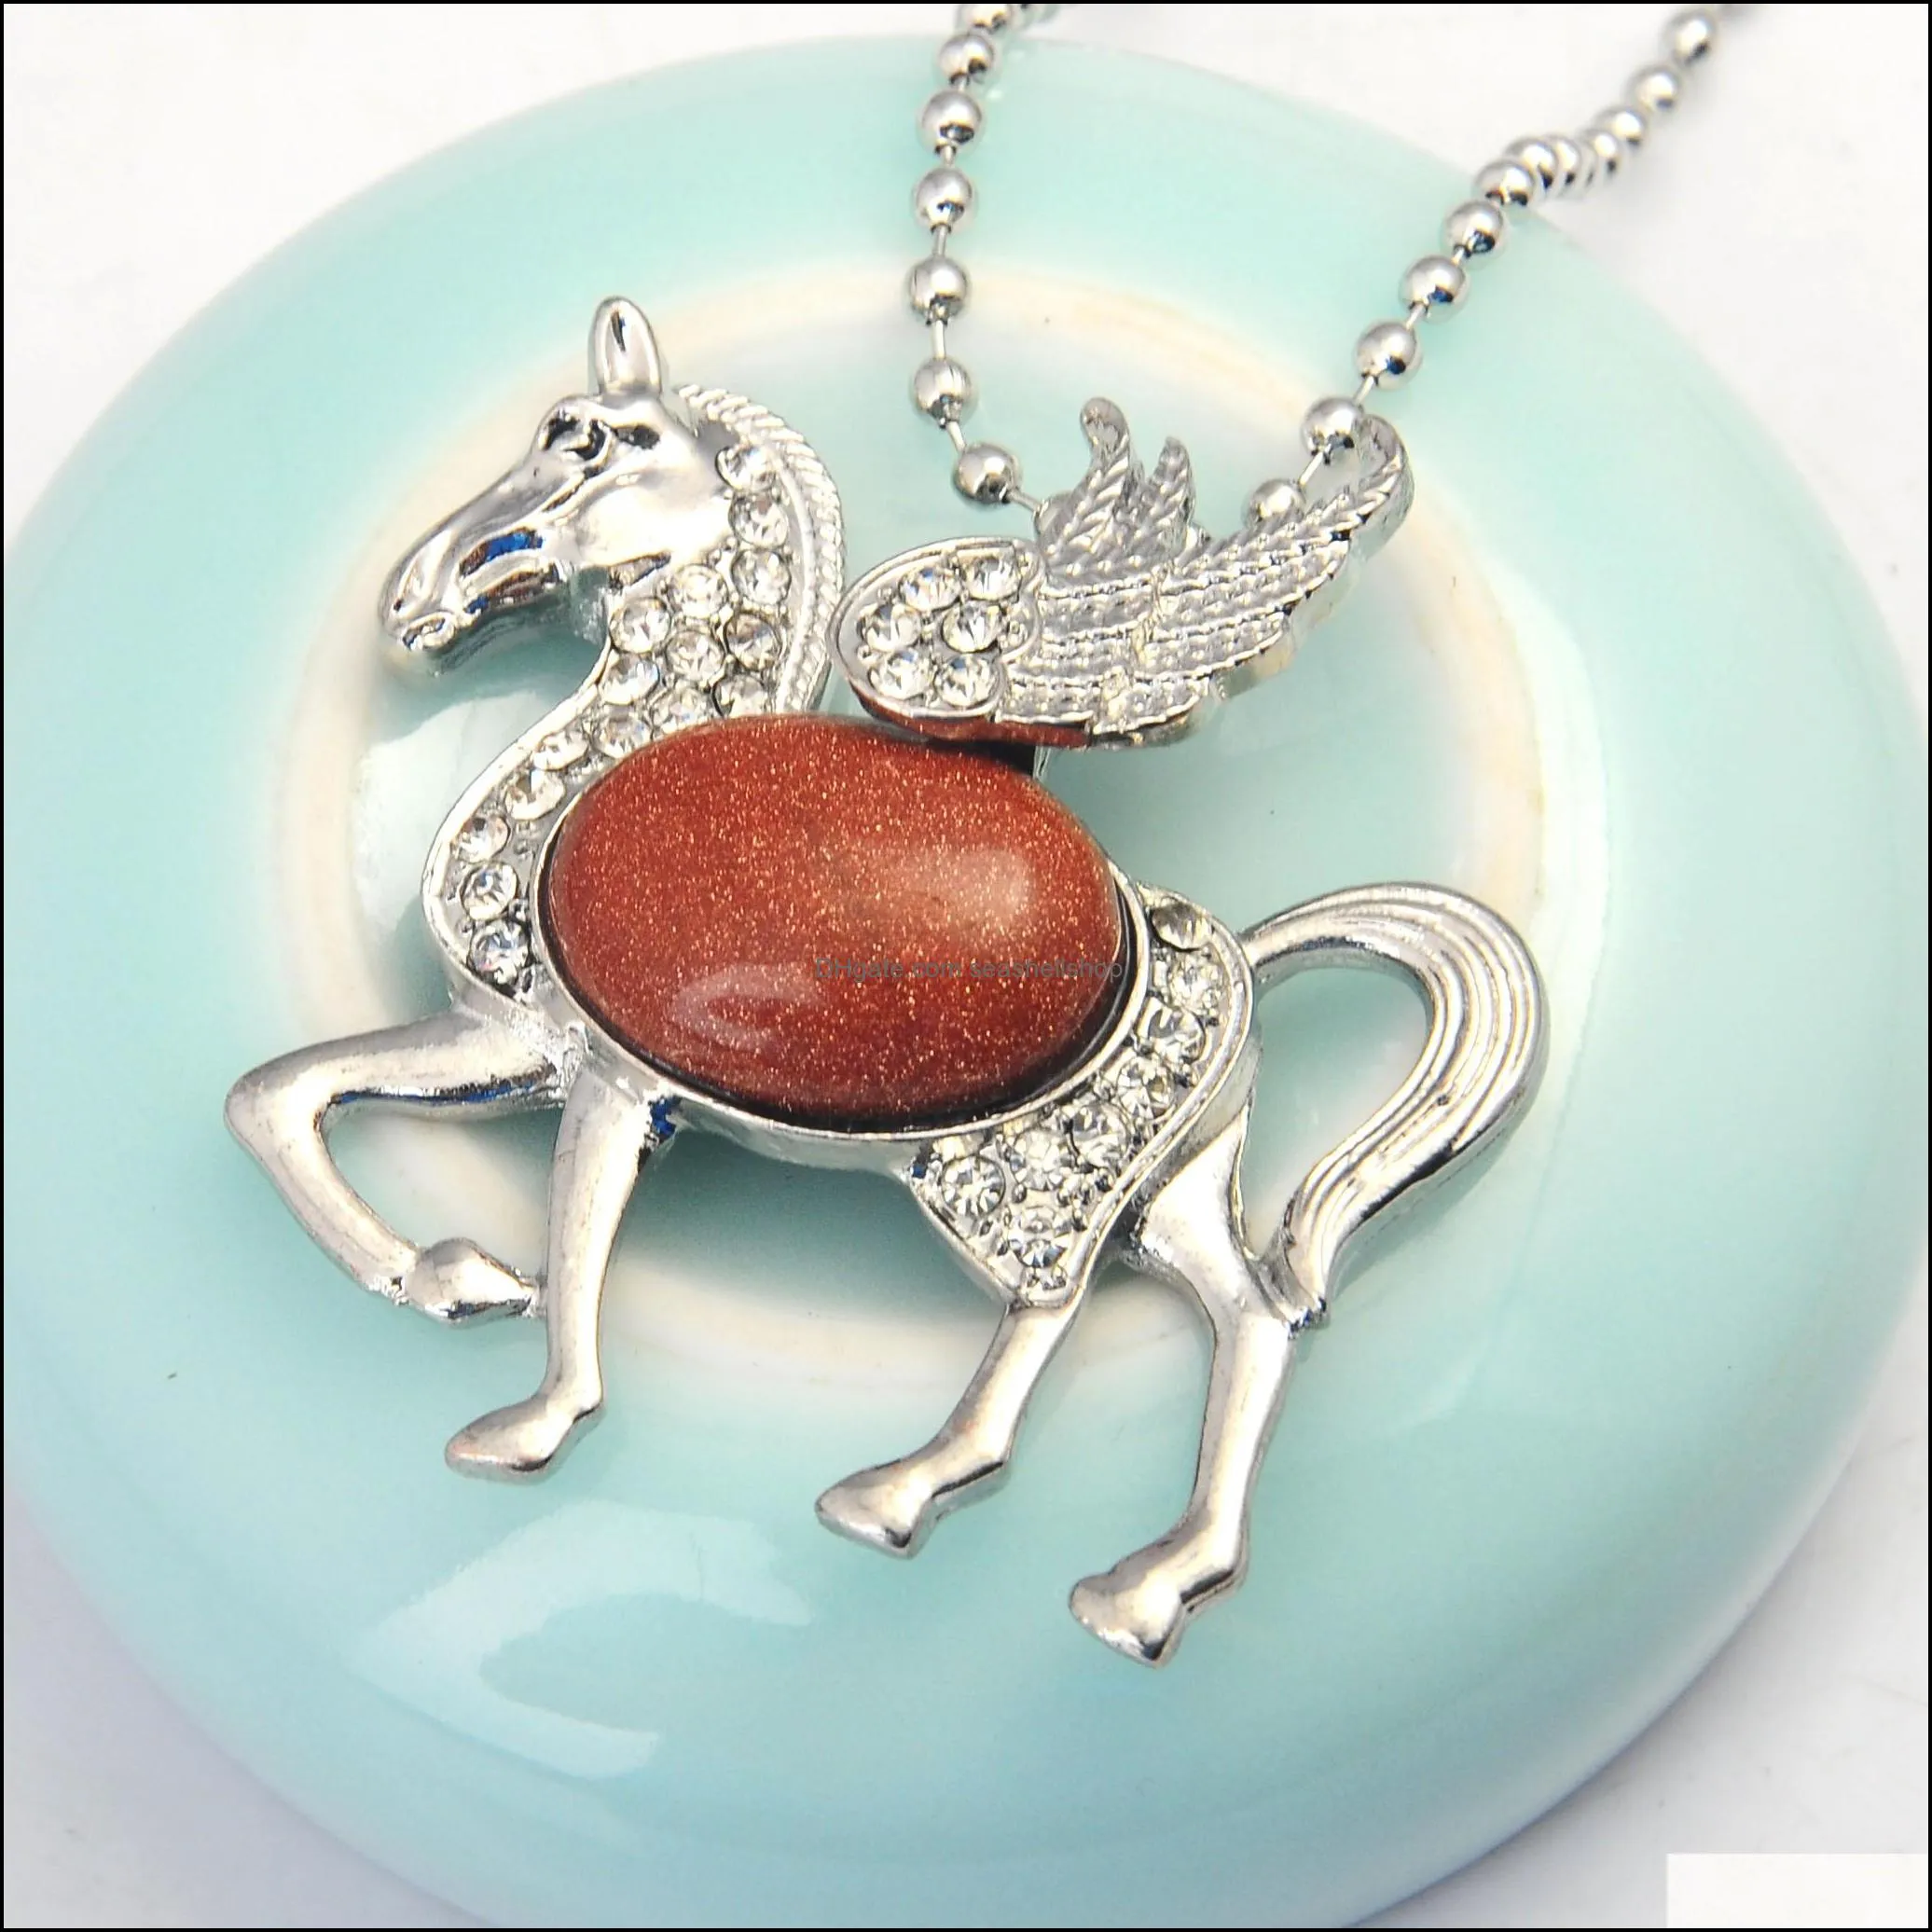 diamond studded winged horse pendant necklace sterling silver dinty jewelry gifts for mom women teen girls